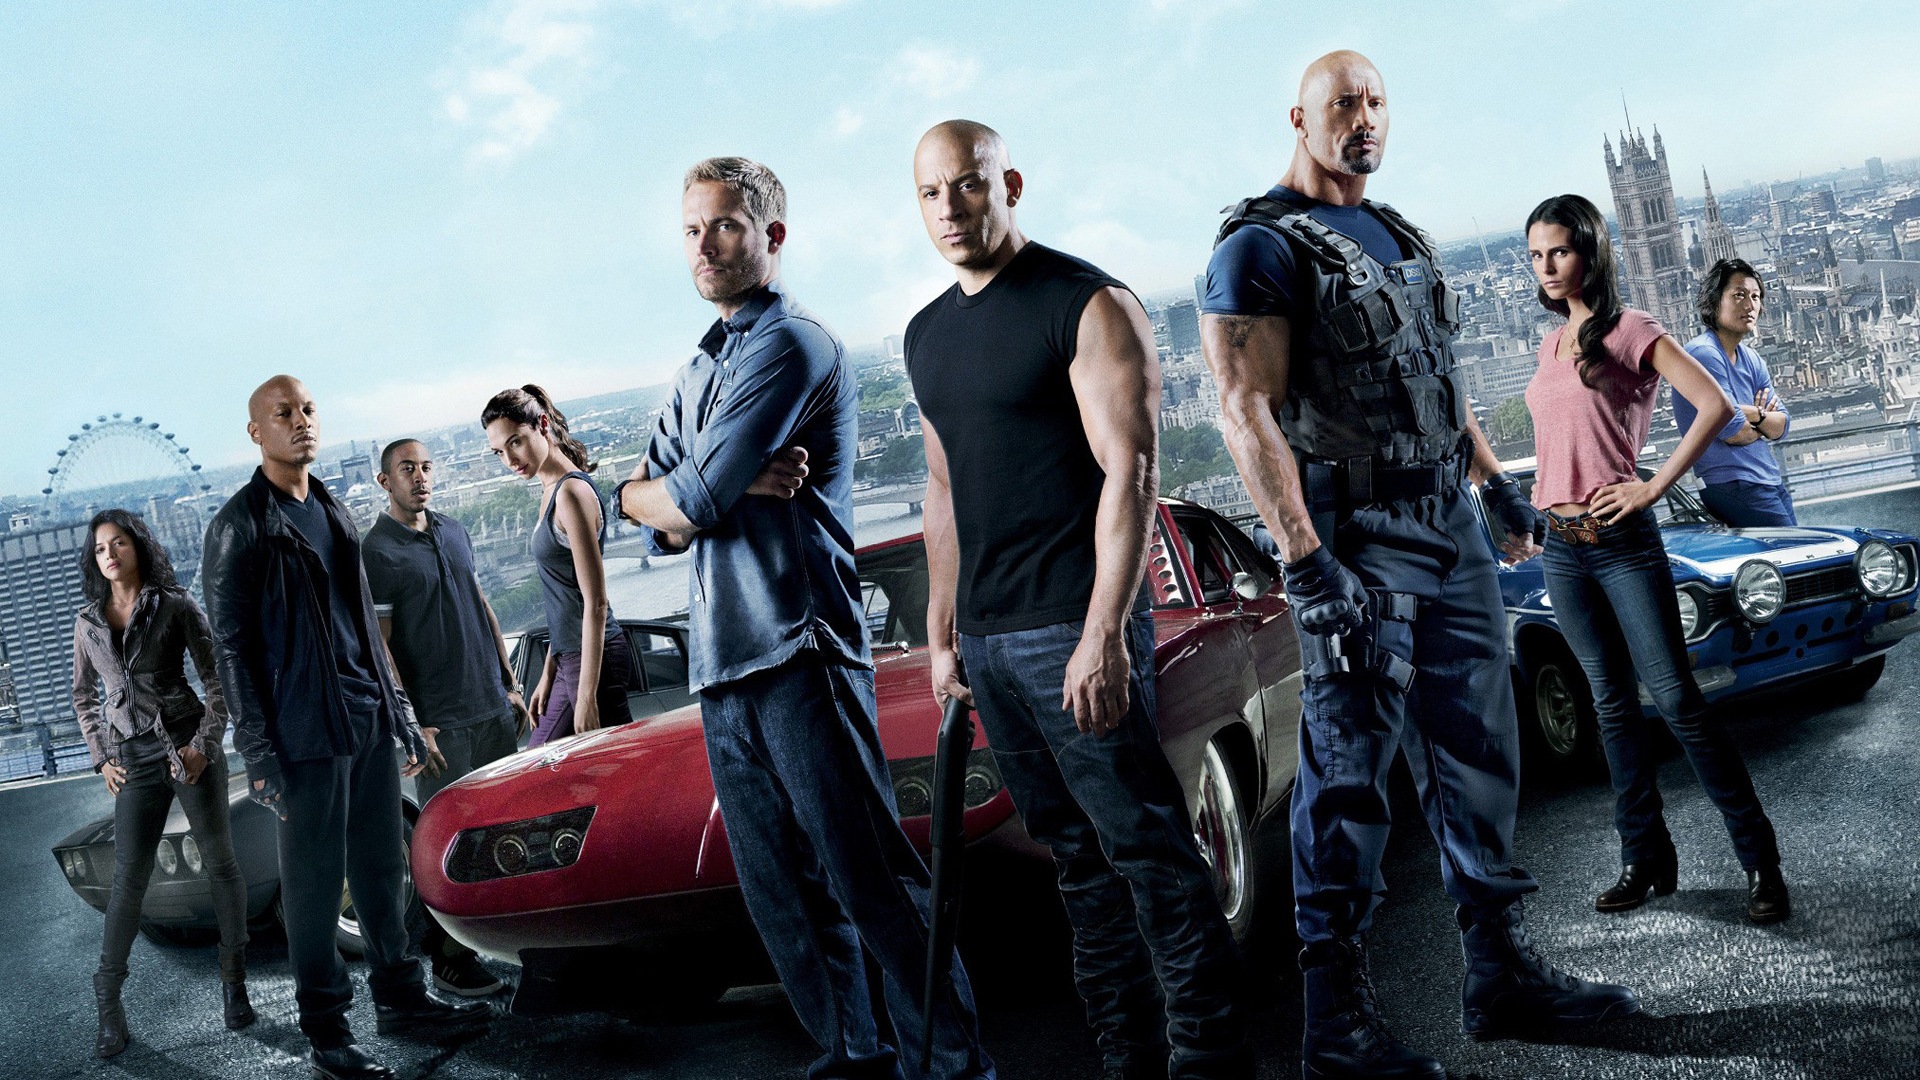 Fast And Furious 6 HD movie wallpapers #1 - 1920x1080